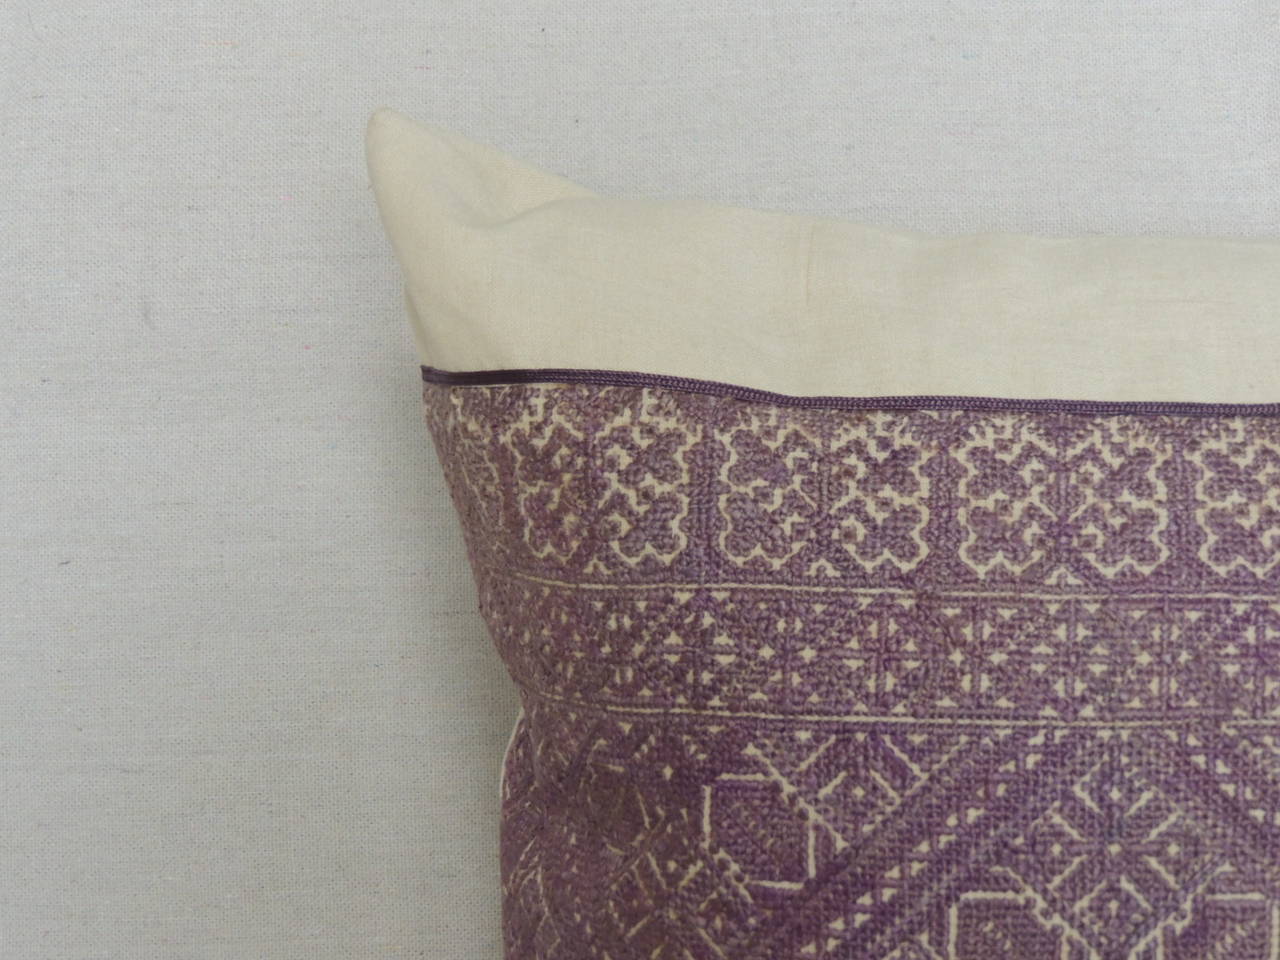 Antique textile Fez embroidery pillow, in shades of light purple and silk decorative trim as accents. Natural antique linen front and backing.